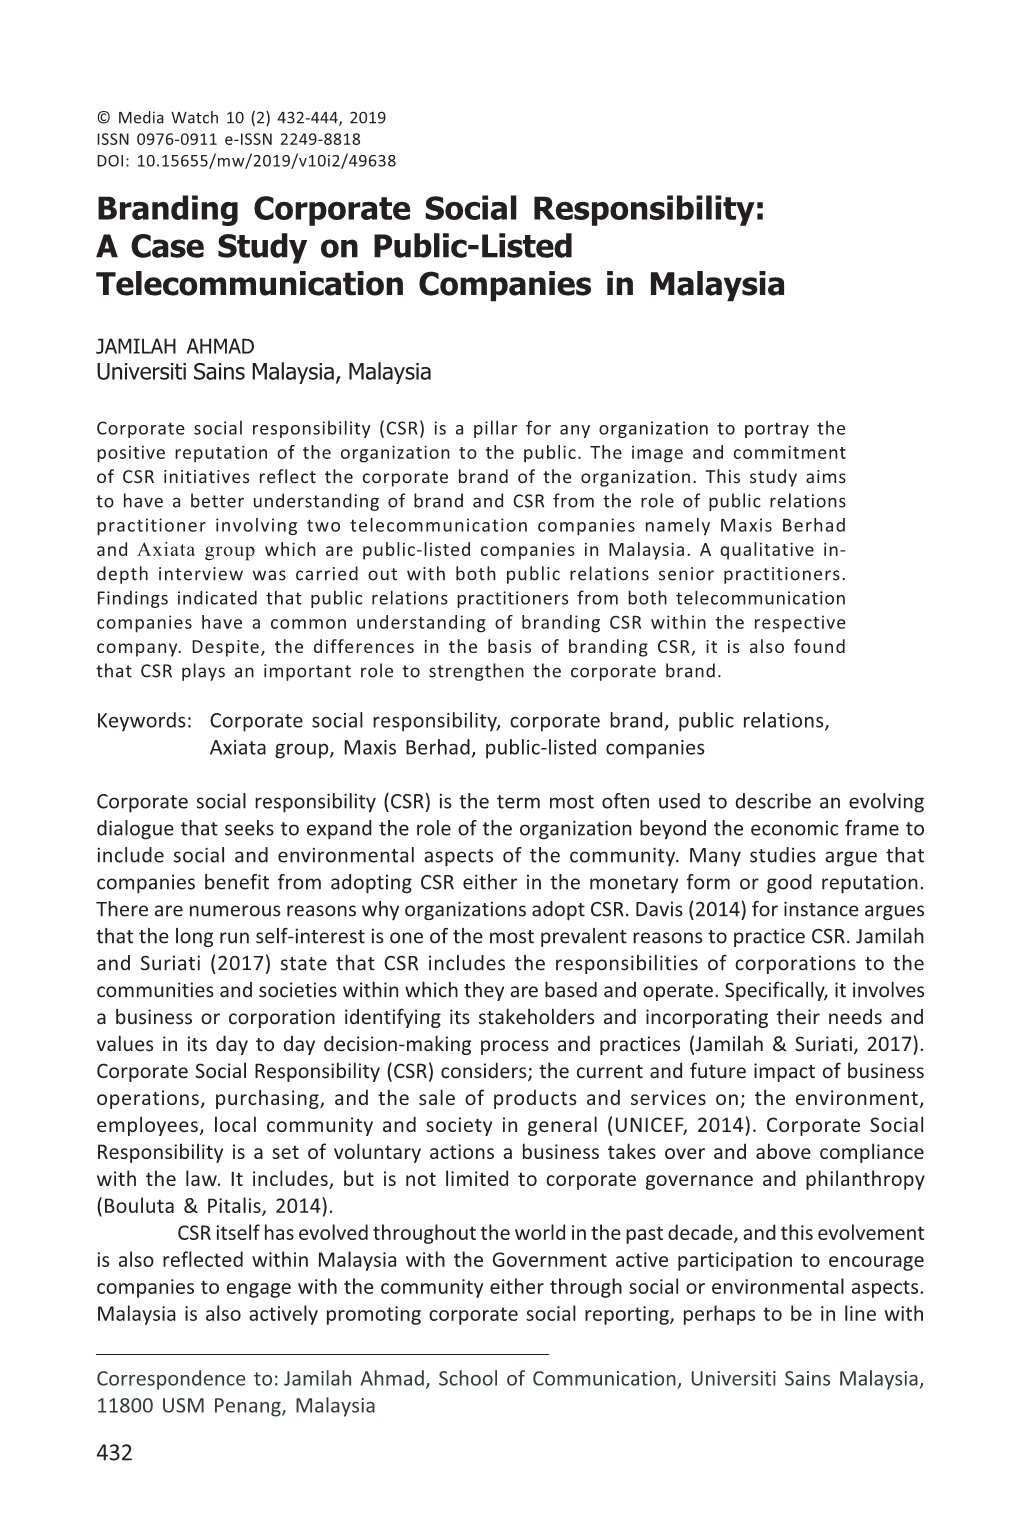 Branding Corporate Social Responsibility: a Case Study on Public-Listed Telecommunication Companies in Malaysia